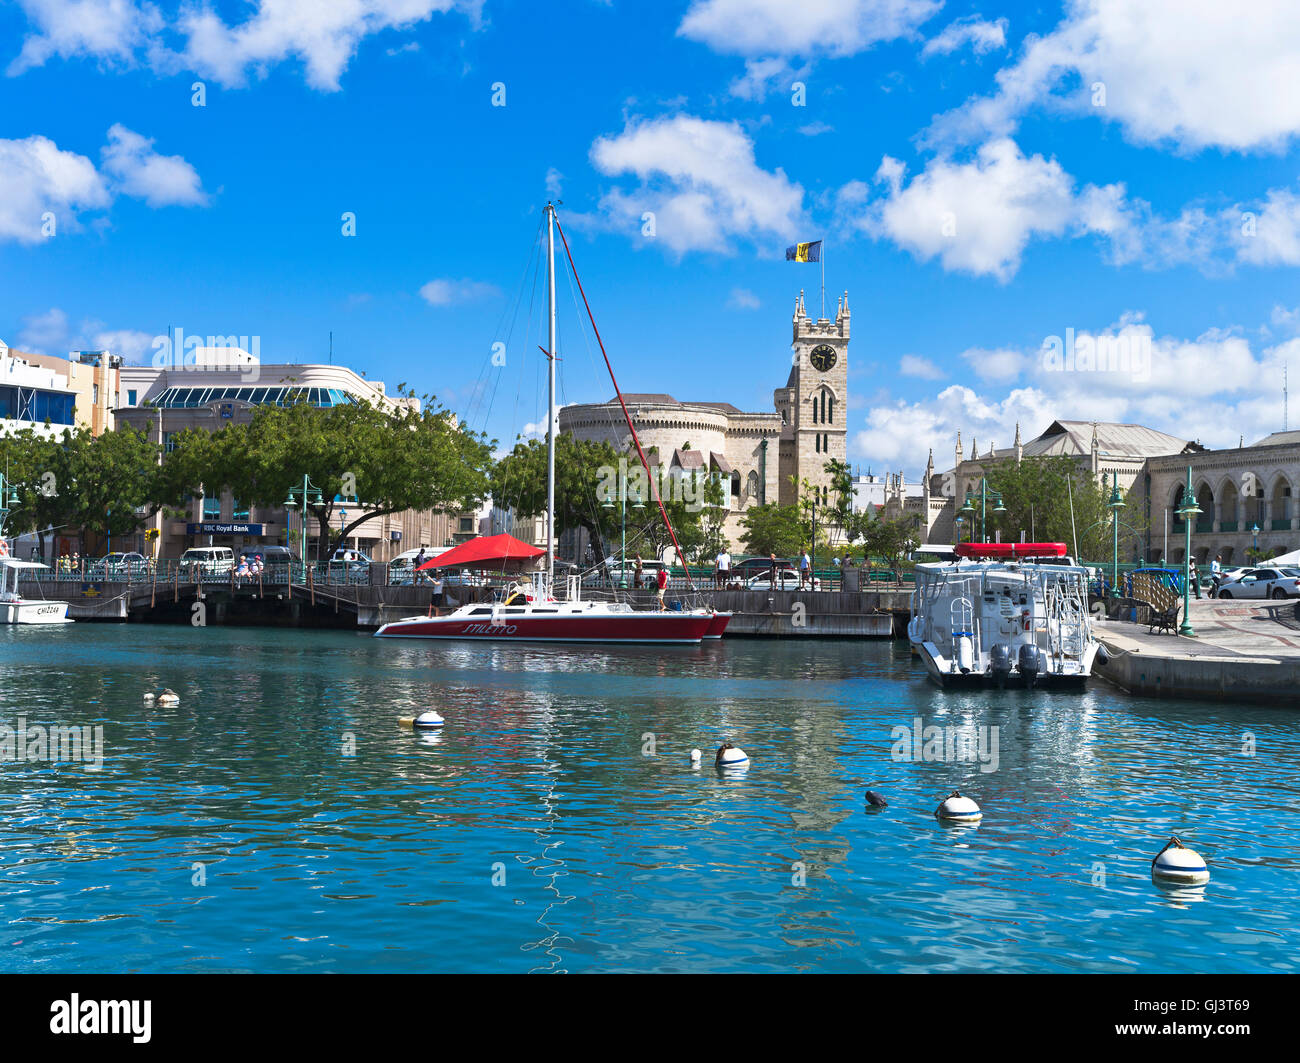 dh Bridgetown BARBADOS CARIBBEAN Careenage anchorage yacht boats harbour Parliament building Stock Photo